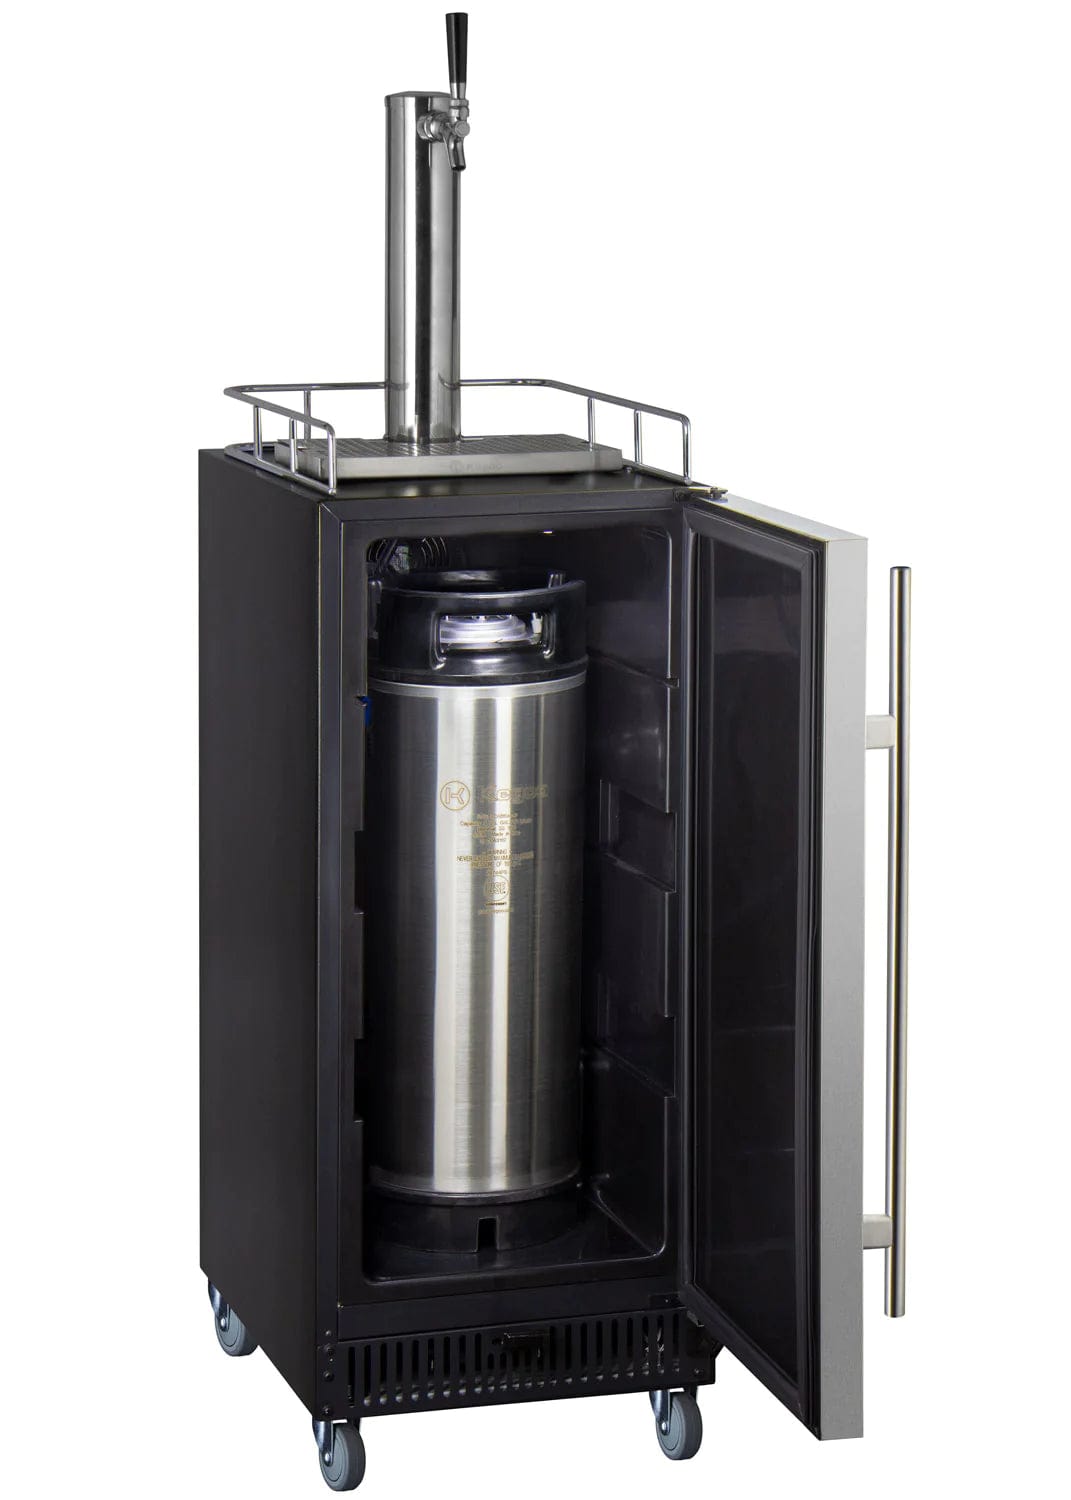 KEGCO Kegerator KEGCO 15 Wide Commercial Cold Brew Cofee Kegerator With Stainless Steel Door-ICS15BSRNK